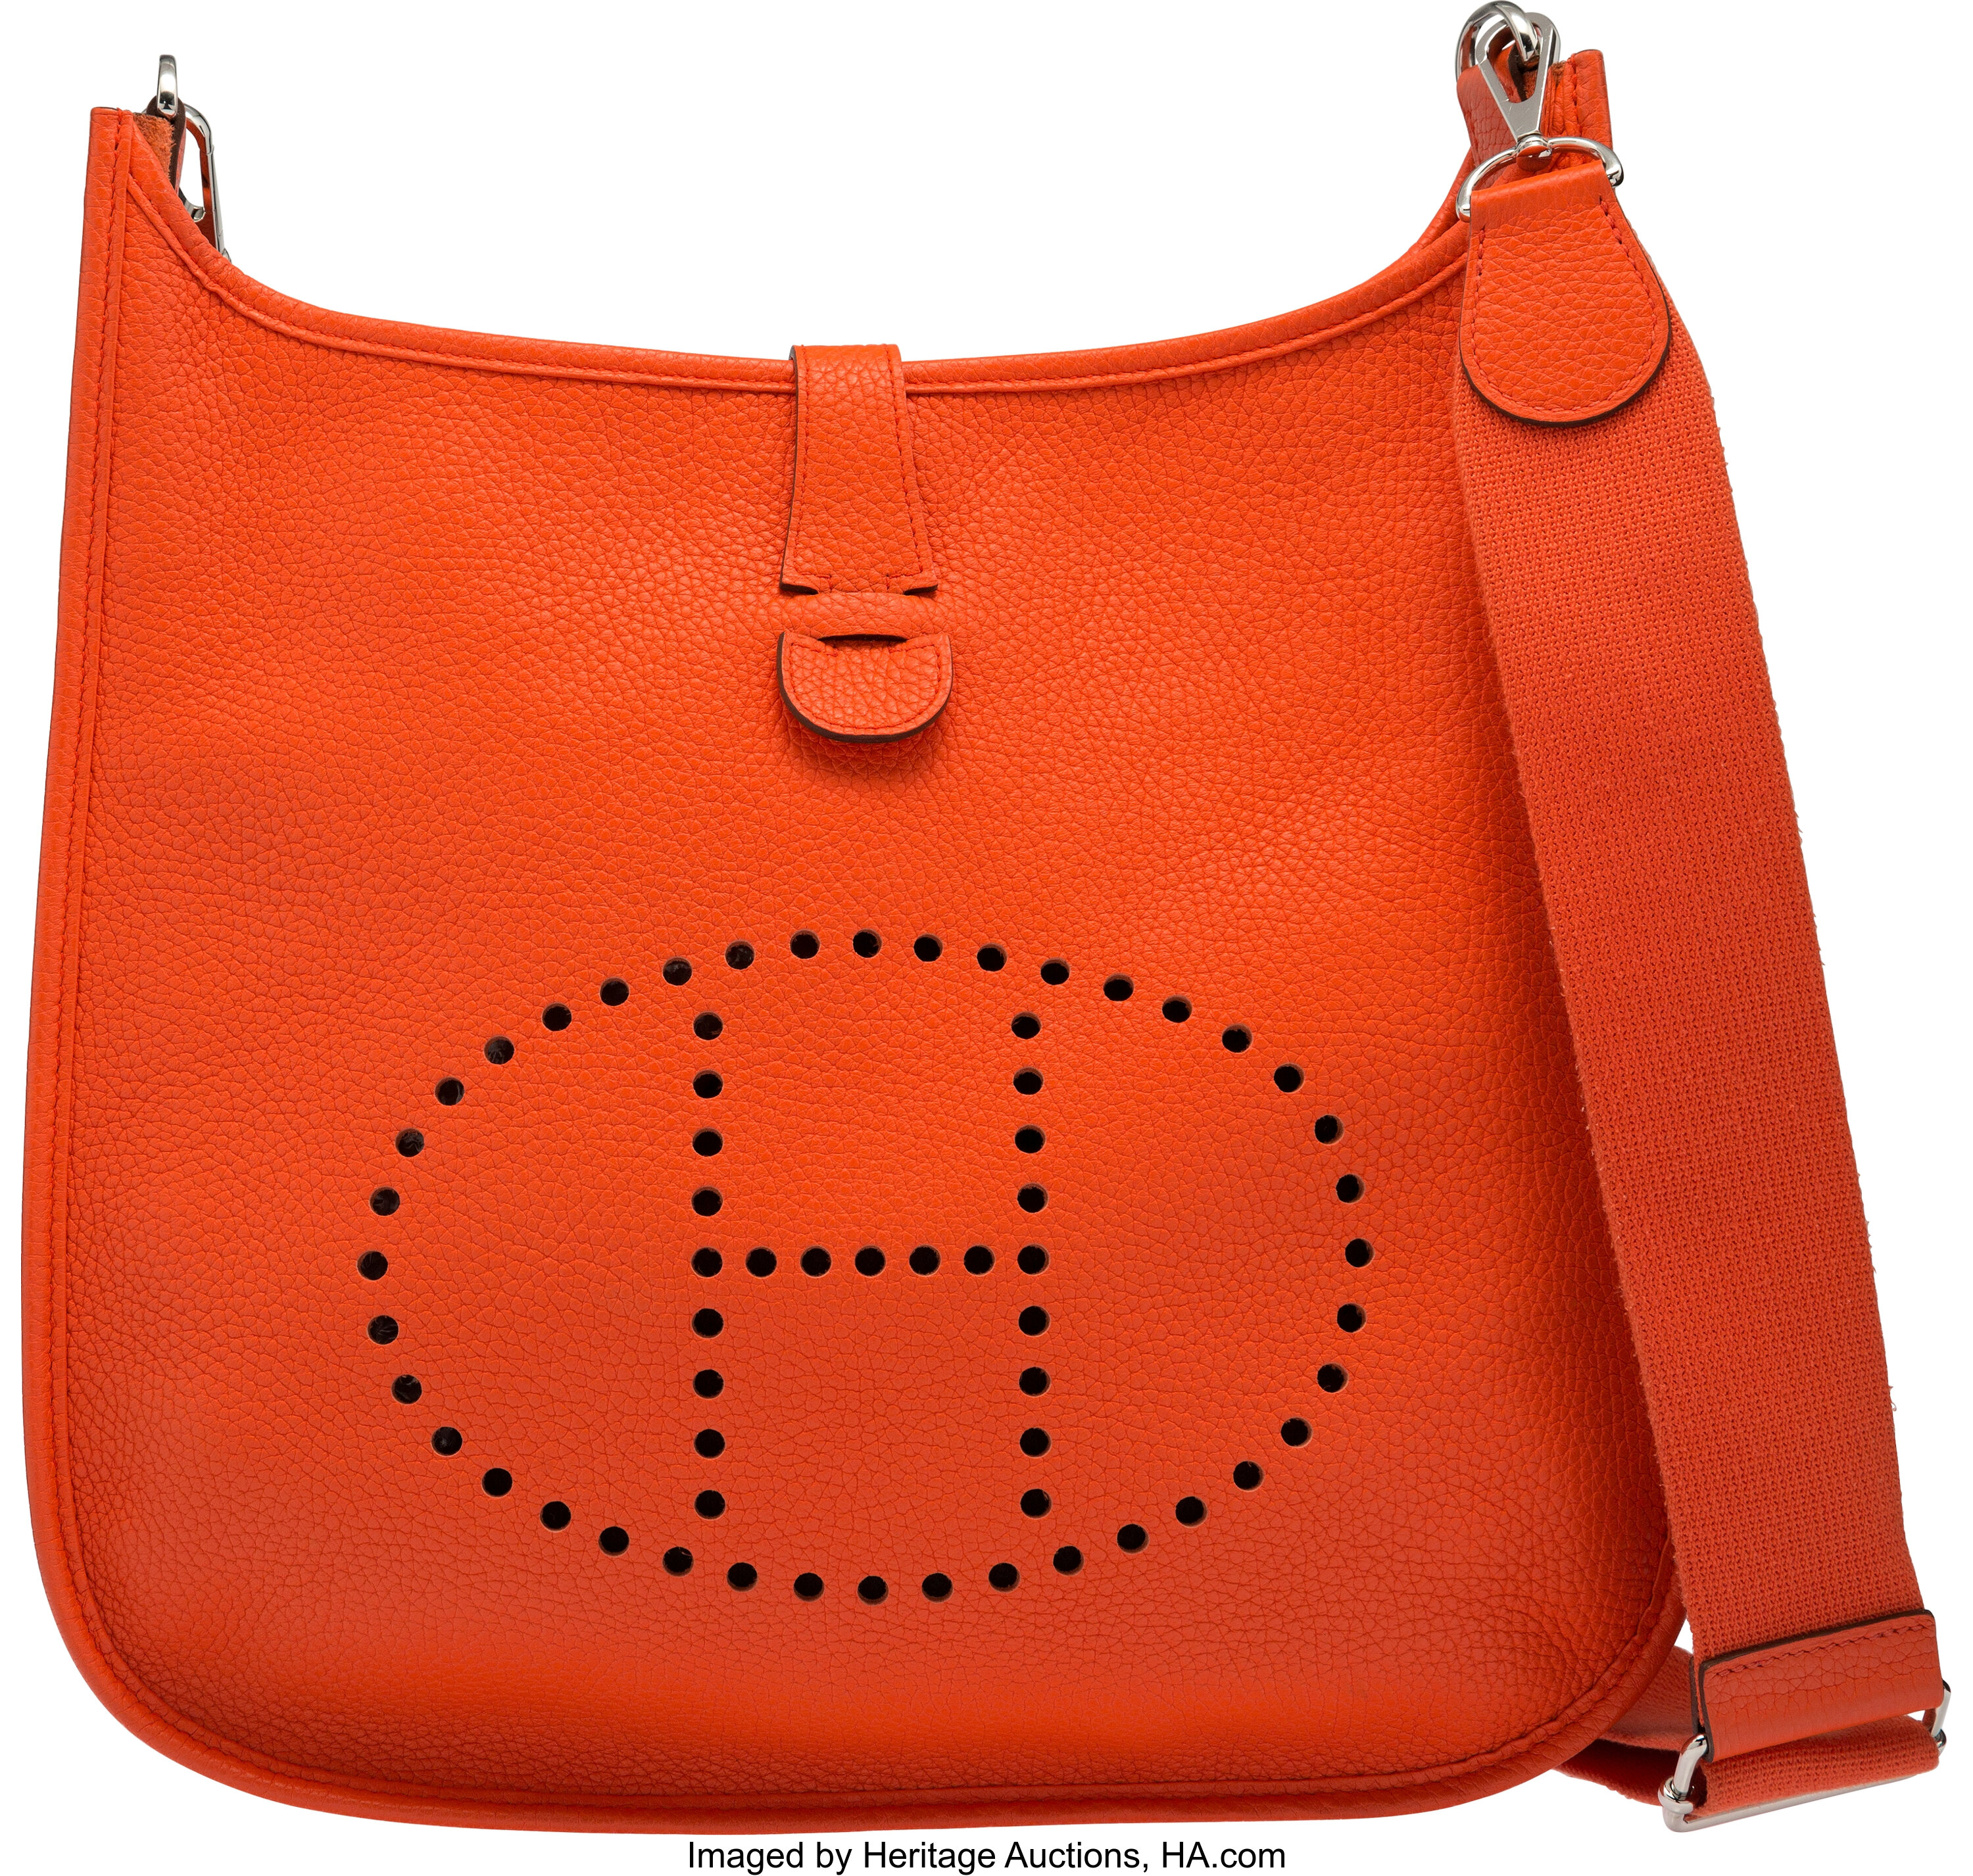 Hermes Rouge H Togo Leather Evelyne I Bag.  Luxury Accessories